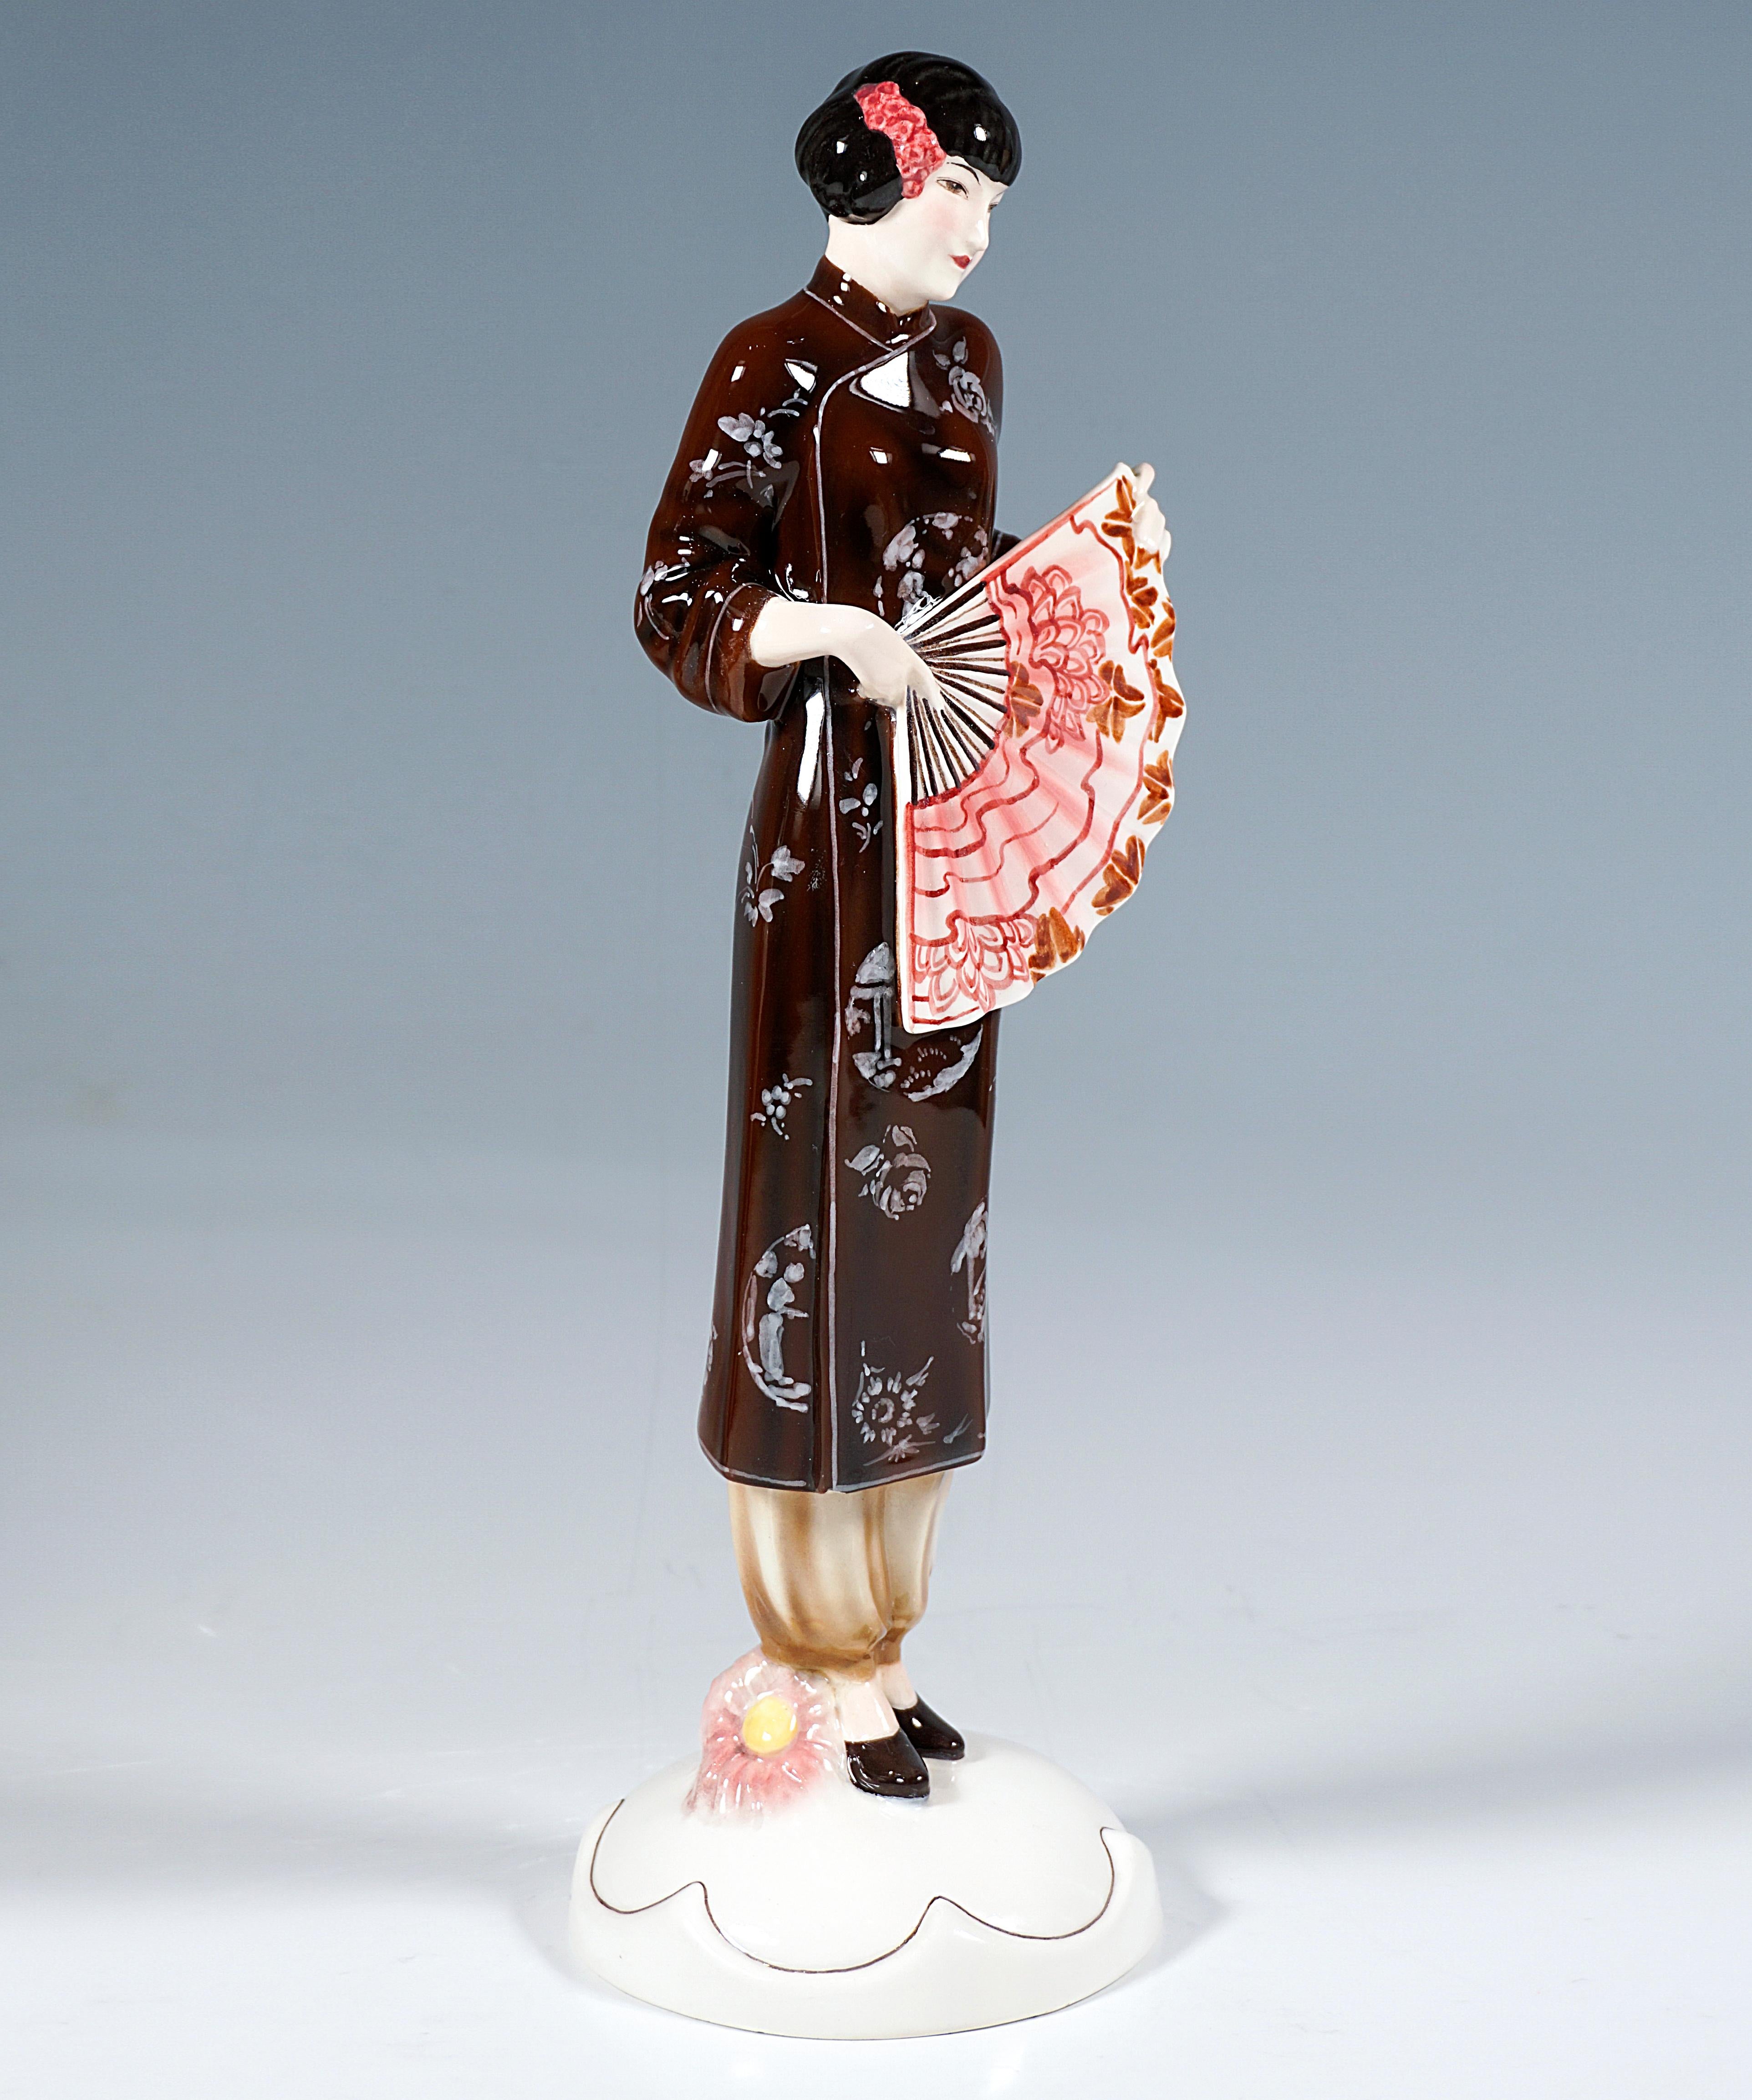 Very rare Goldscheider Vienna Ceramic Figurine of the 1930s:
Representation of a young lady in a brown, Japanese silk coat over light, baggy trousers, hair pinned up with floral decoration, standing upright and holding a large fan in both hands in